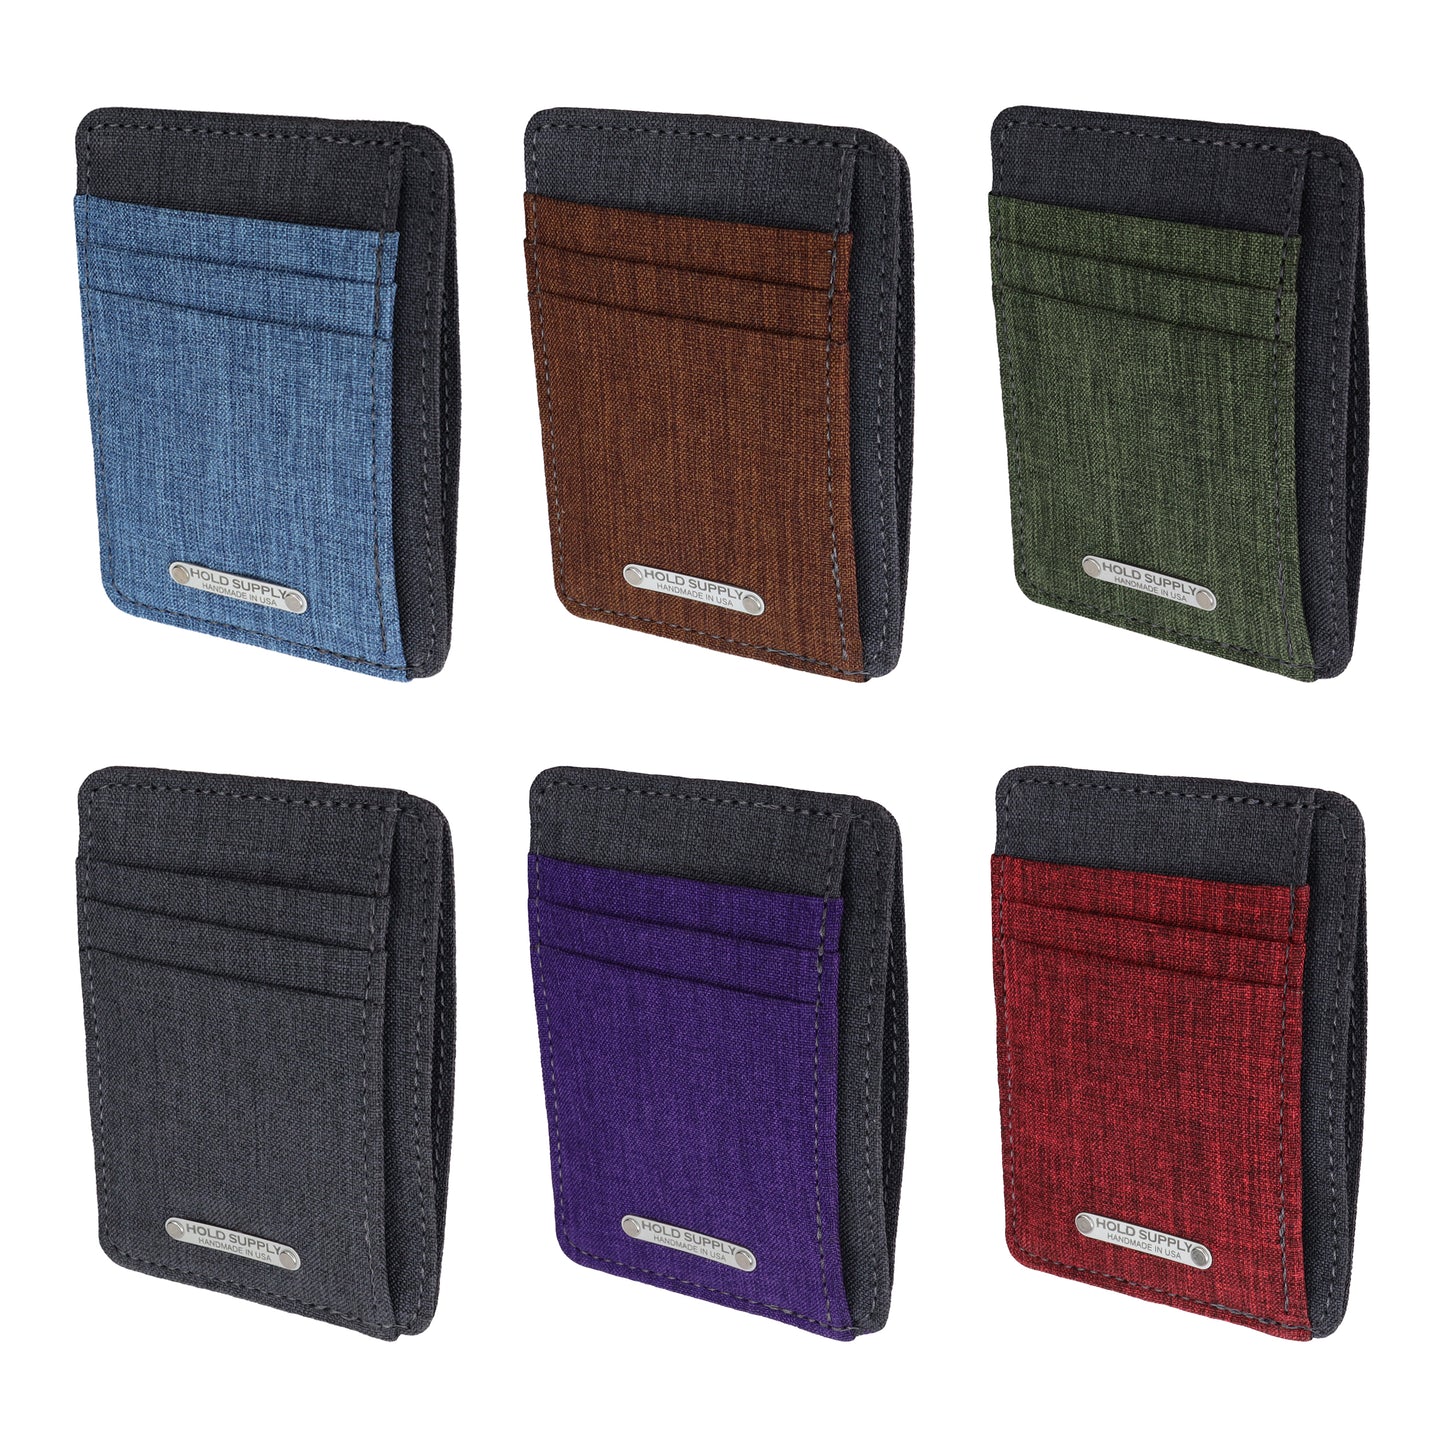 Purple and Gray Fabric Front Pocket Wallet